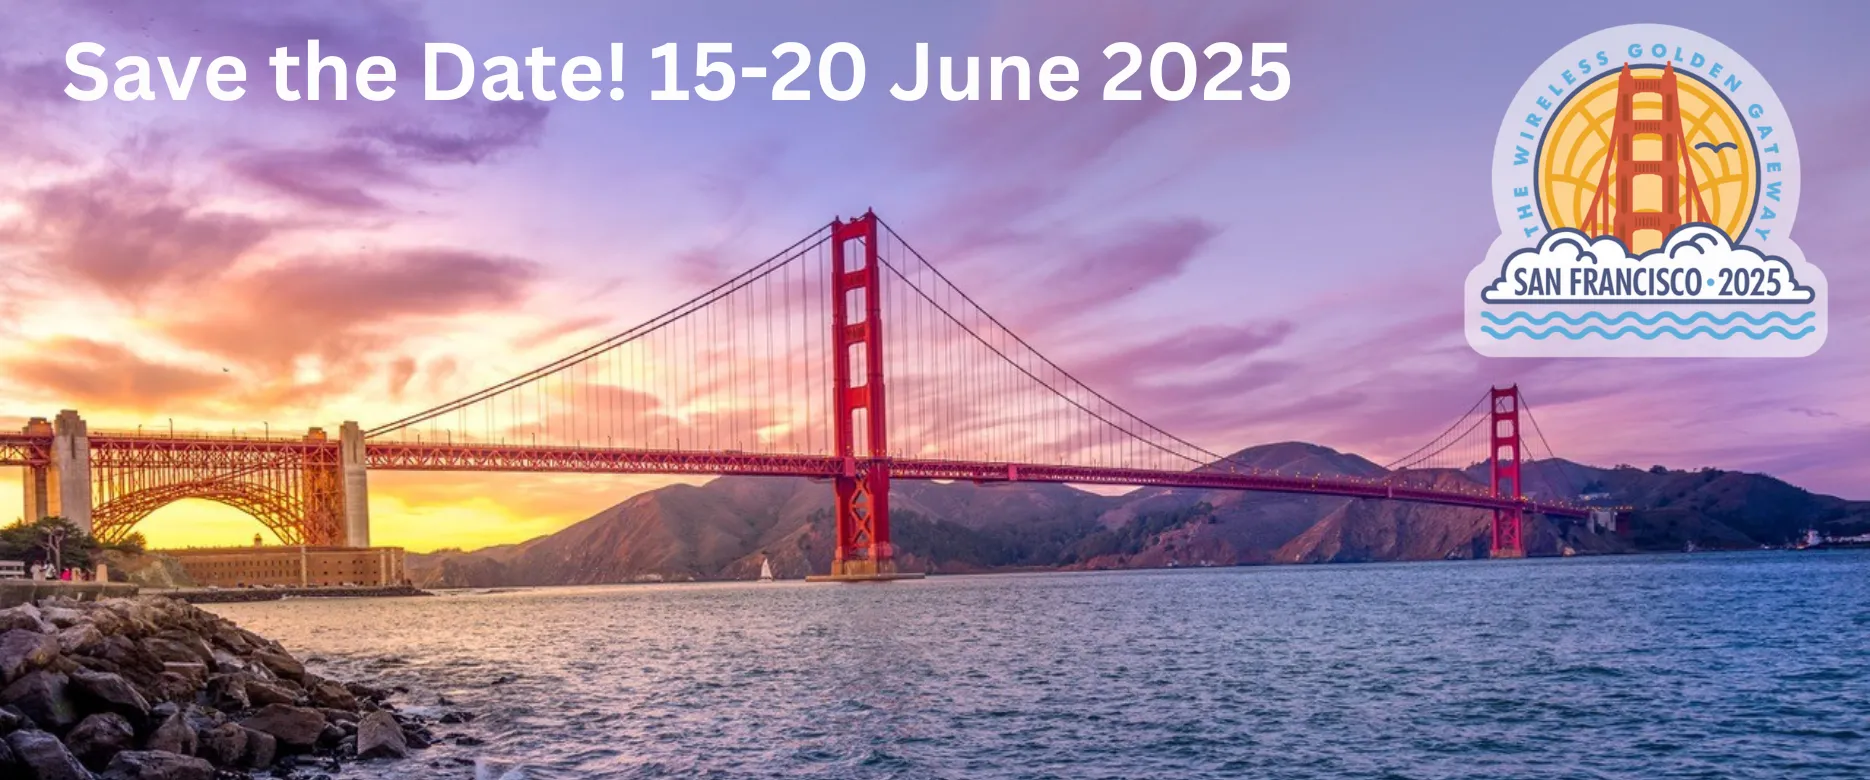 Save the Date! 15-20 June 2025